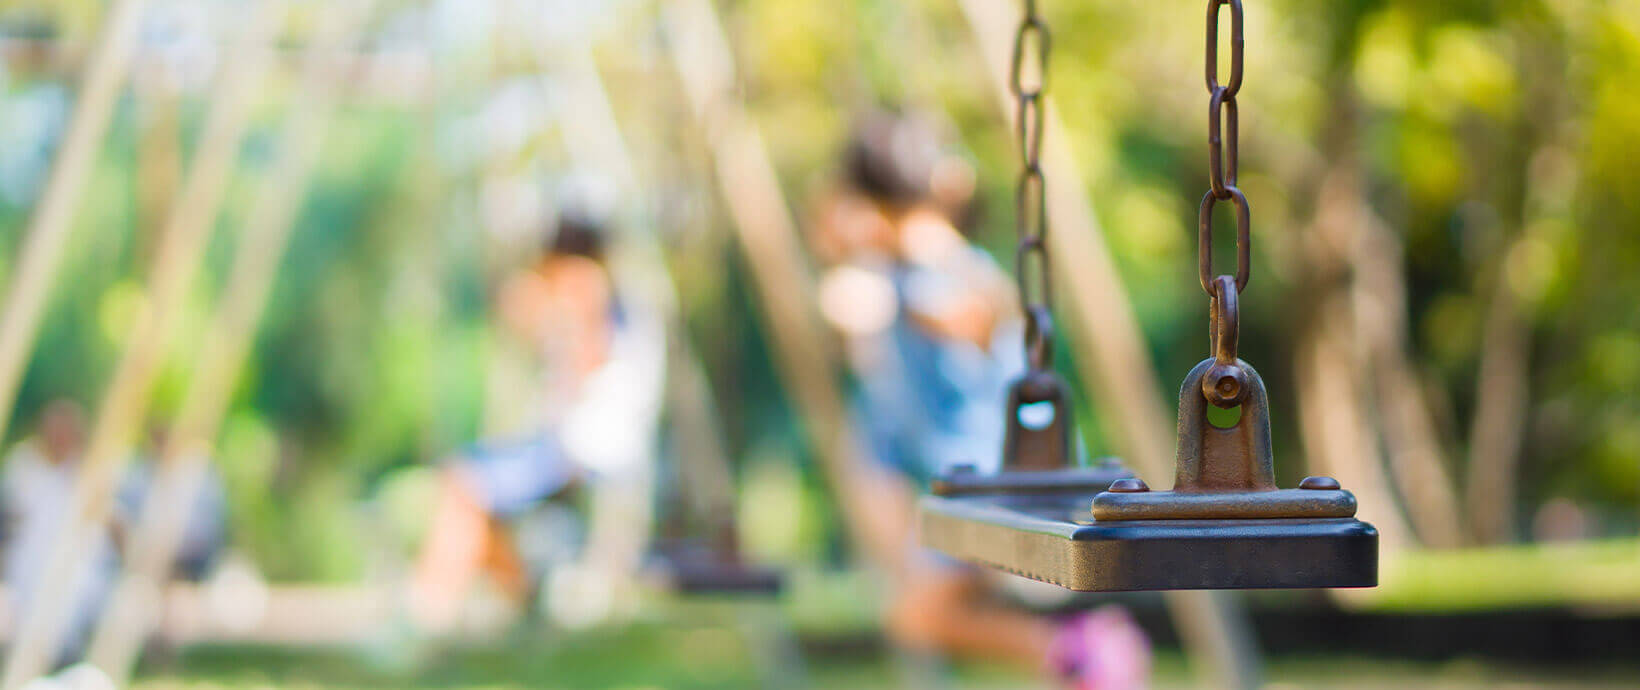 What the Playground Can Teach Us About Resonance in Dynamics